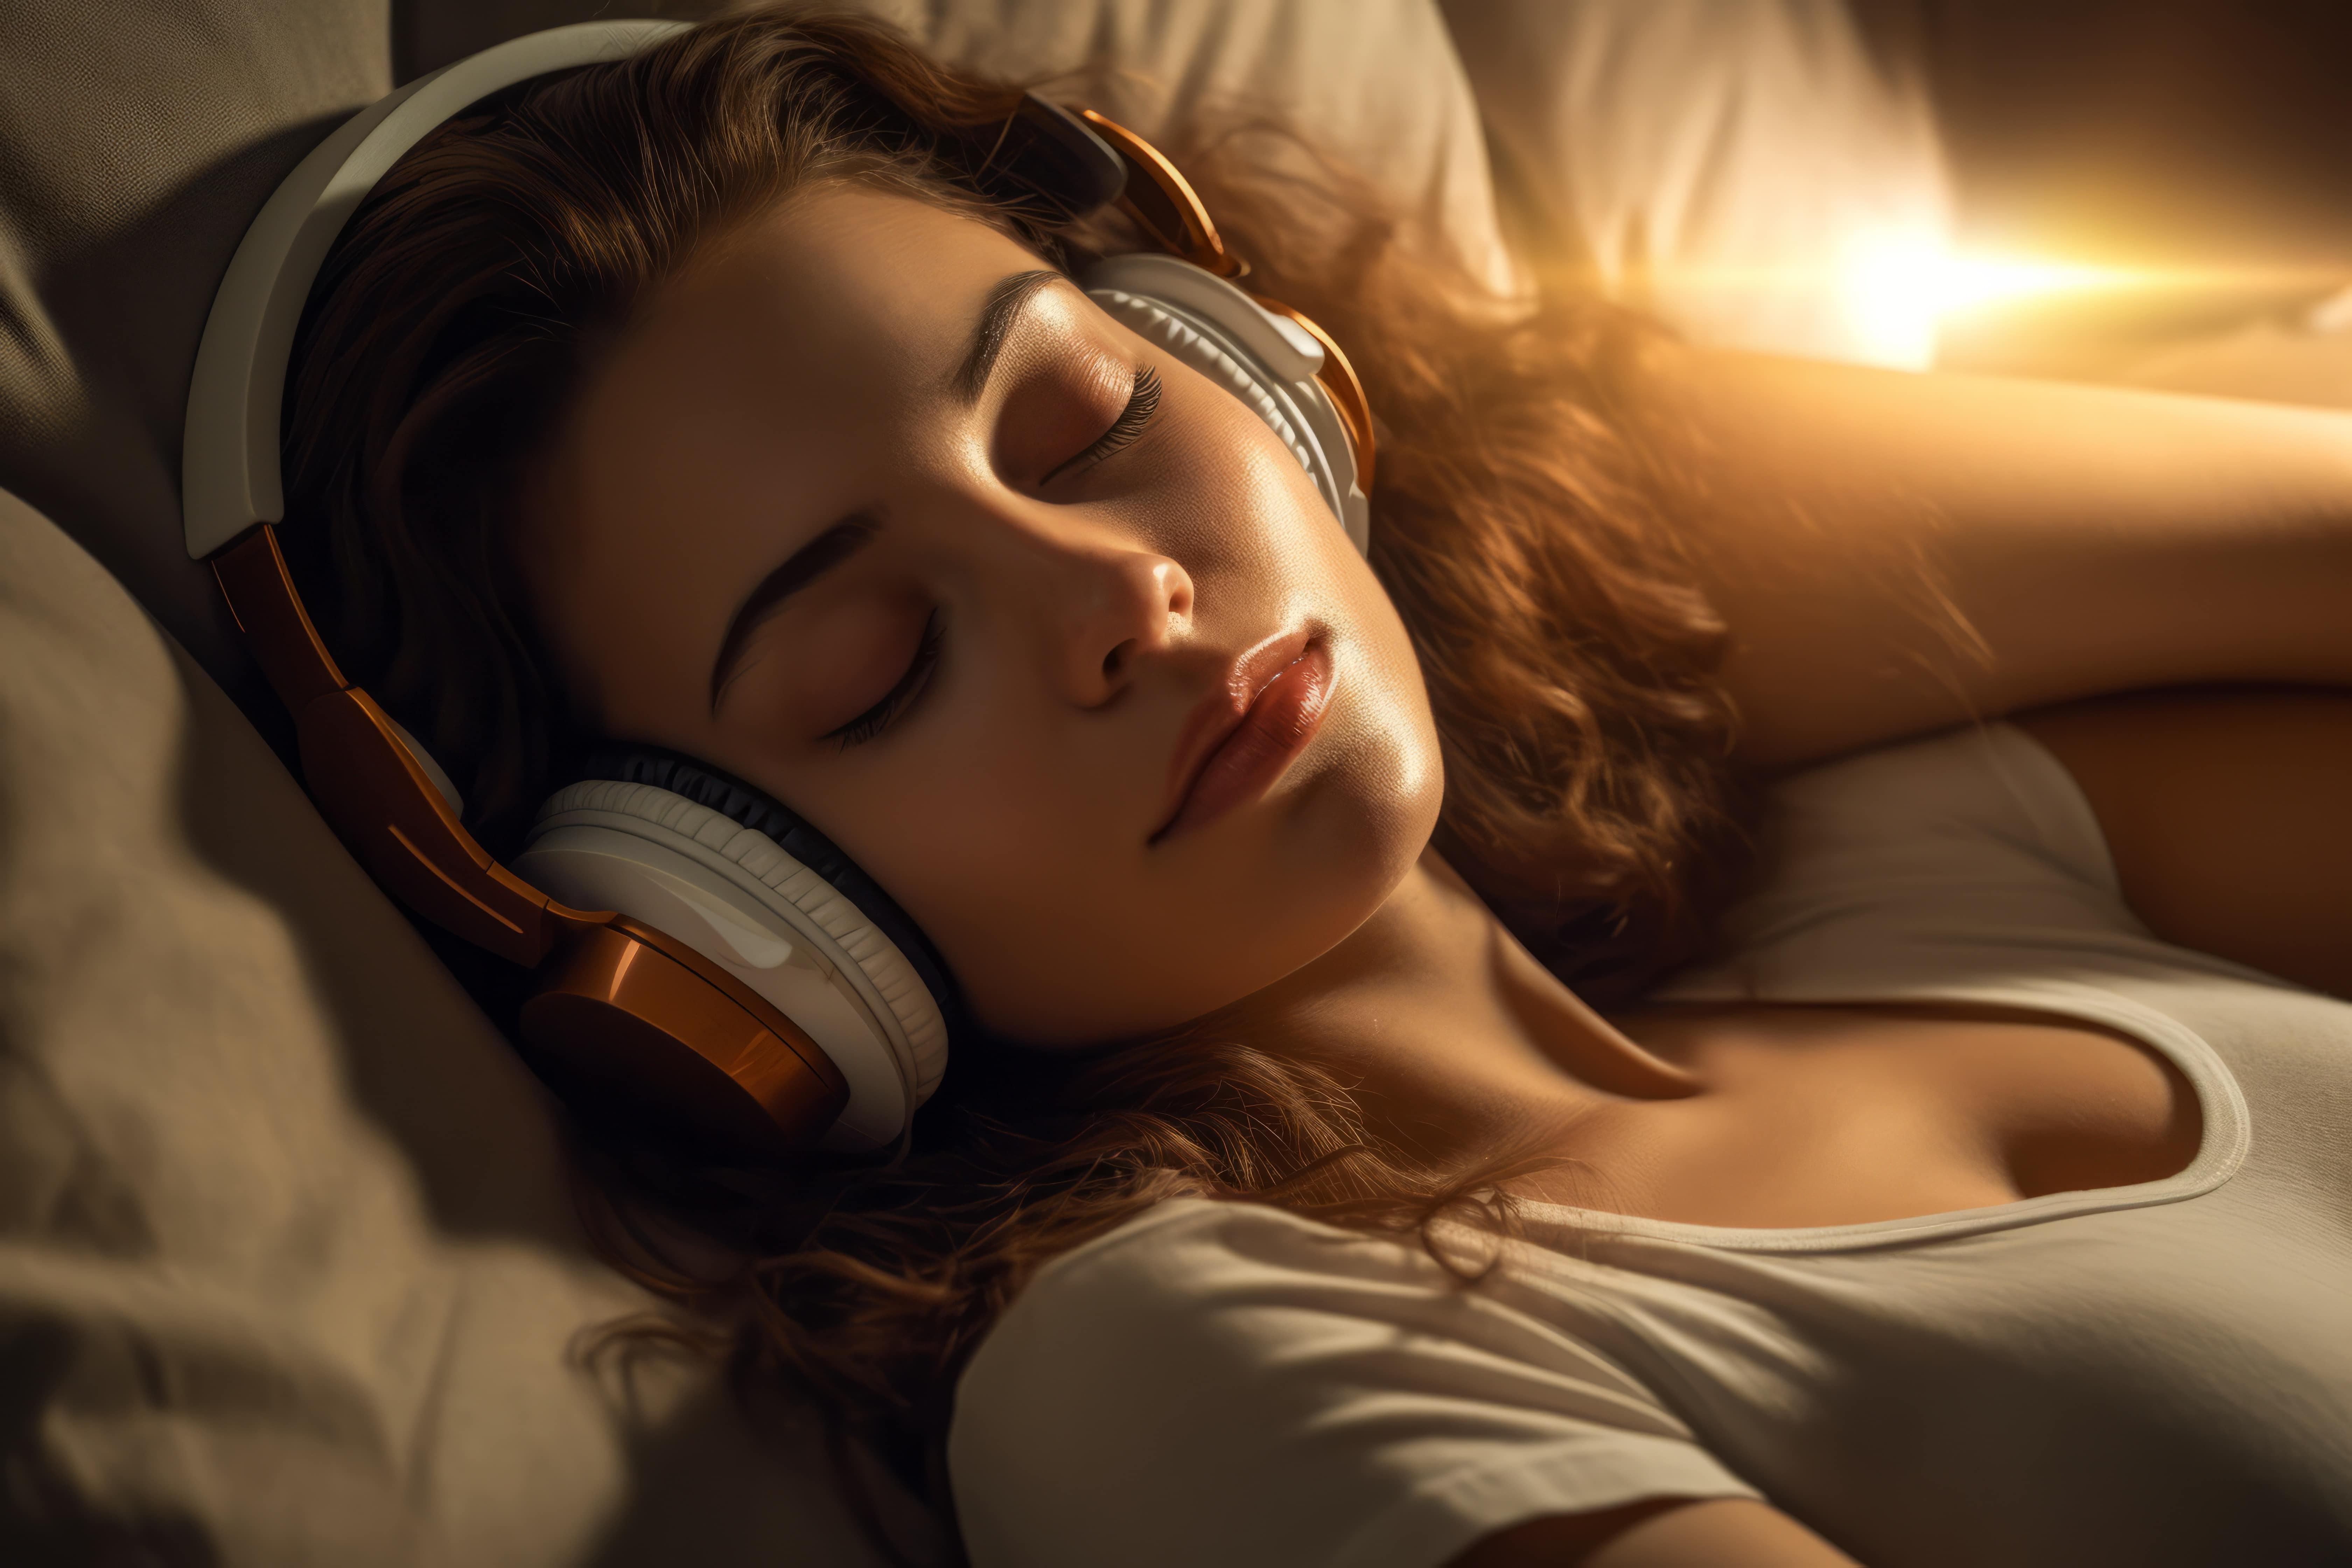 A lady falling asleep thanks to the comfortable quiet offered by her noise cancelling headphones